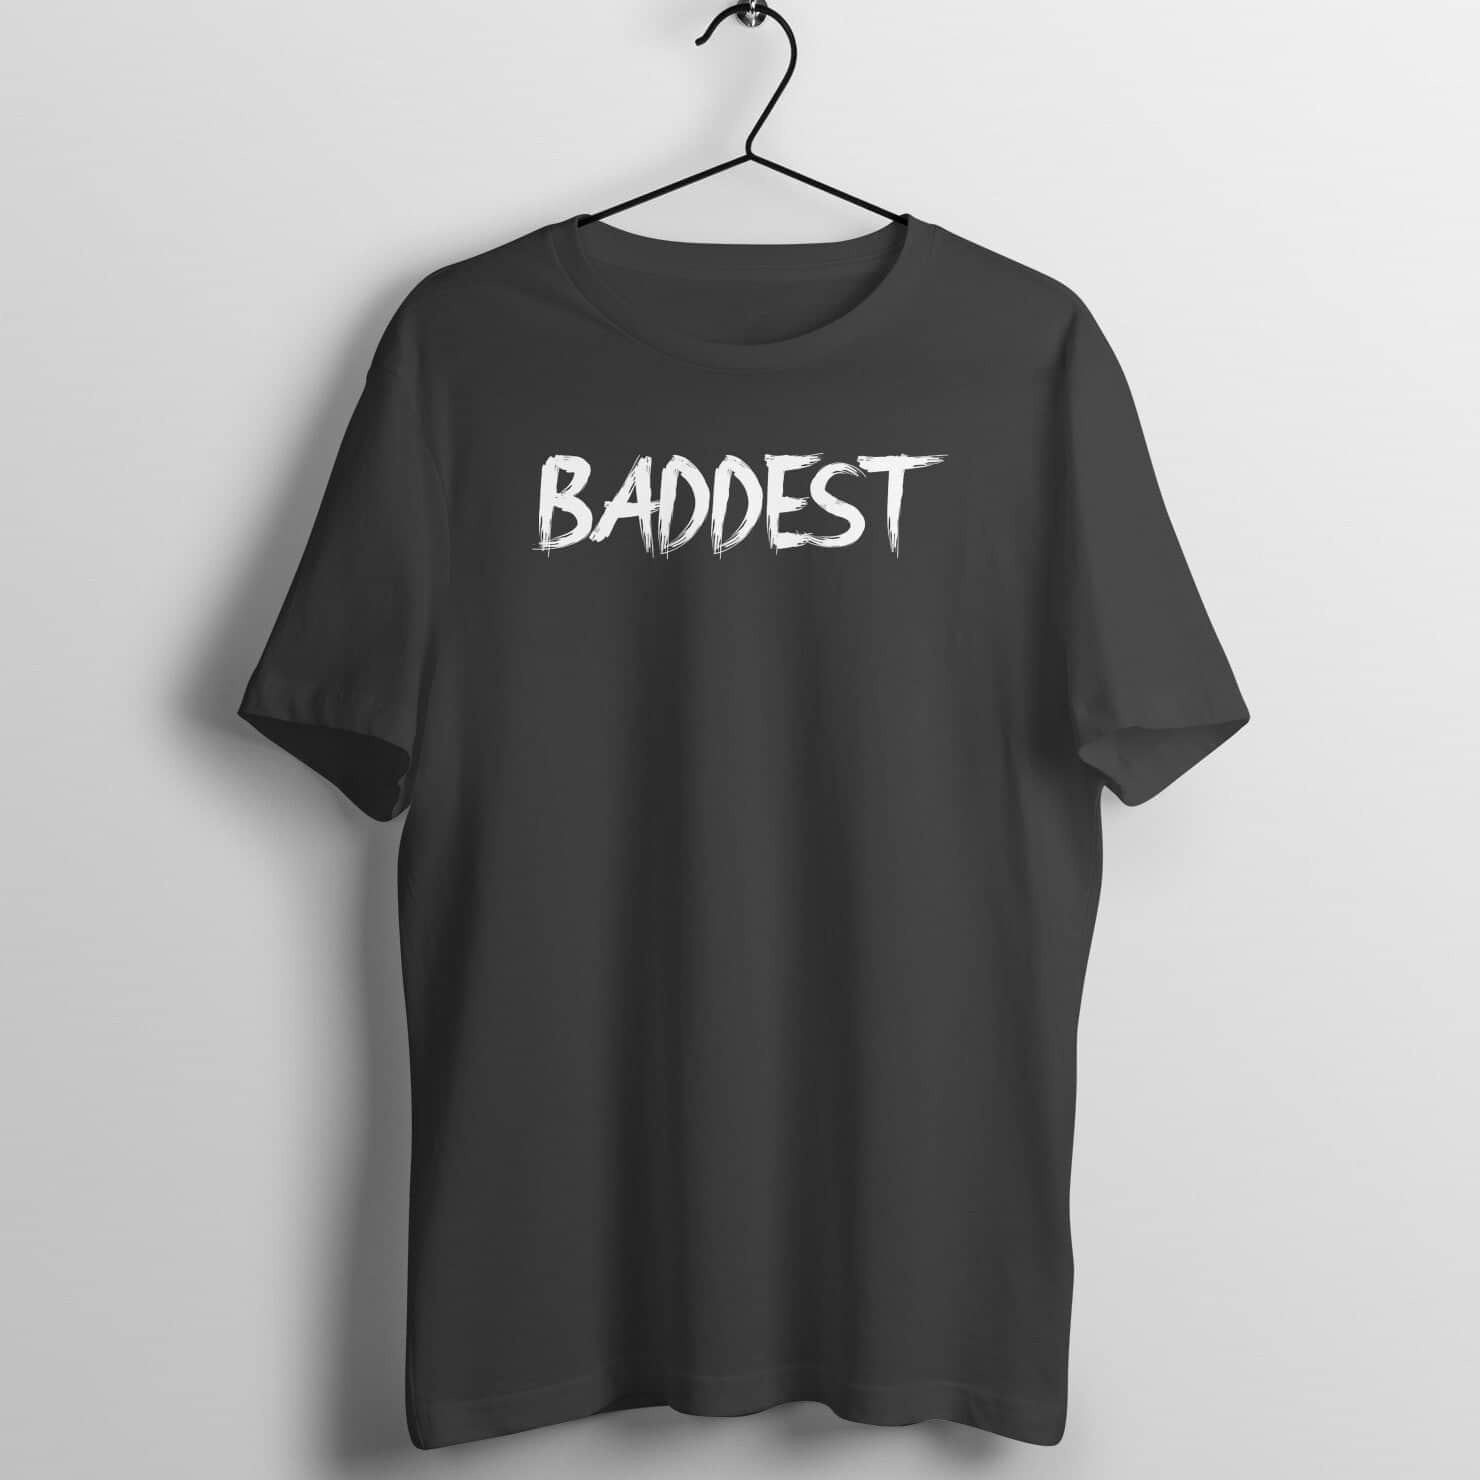 Baddest Exclusive Swag T Shirt for Men and Women freeshipping - Catch My Drift India